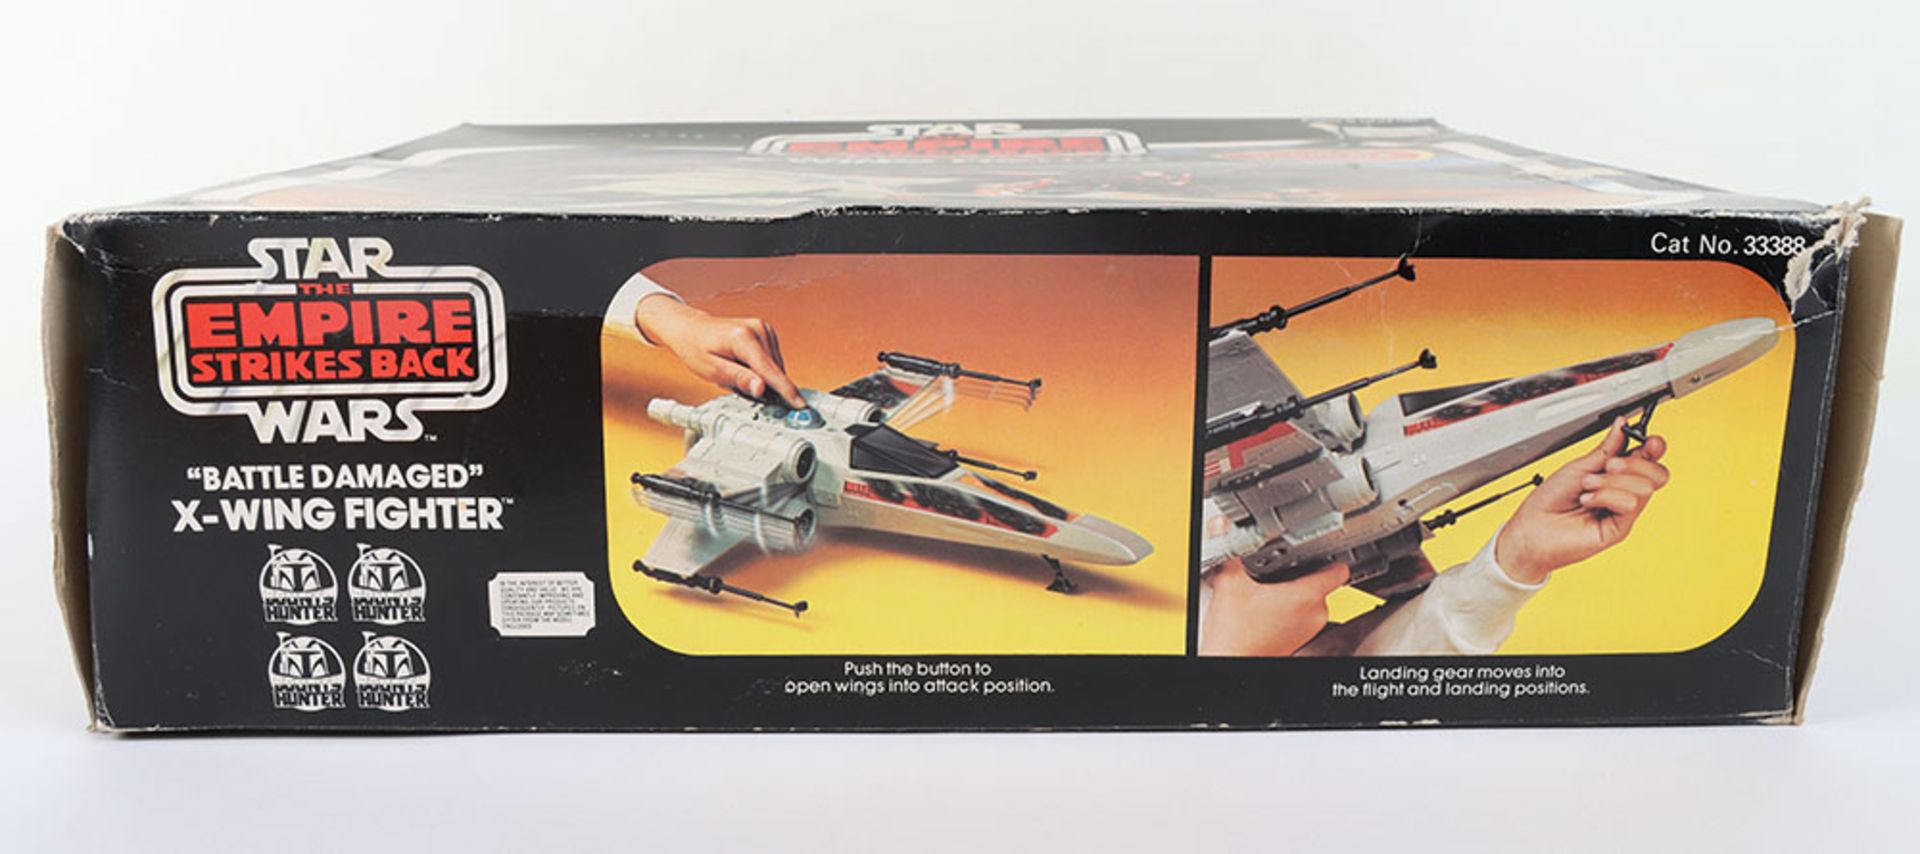 Boxed Vintage Palitoy Star Wars The Empire Strikes Back Battle Damaged X-Wing Fighter - Image 7 of 8